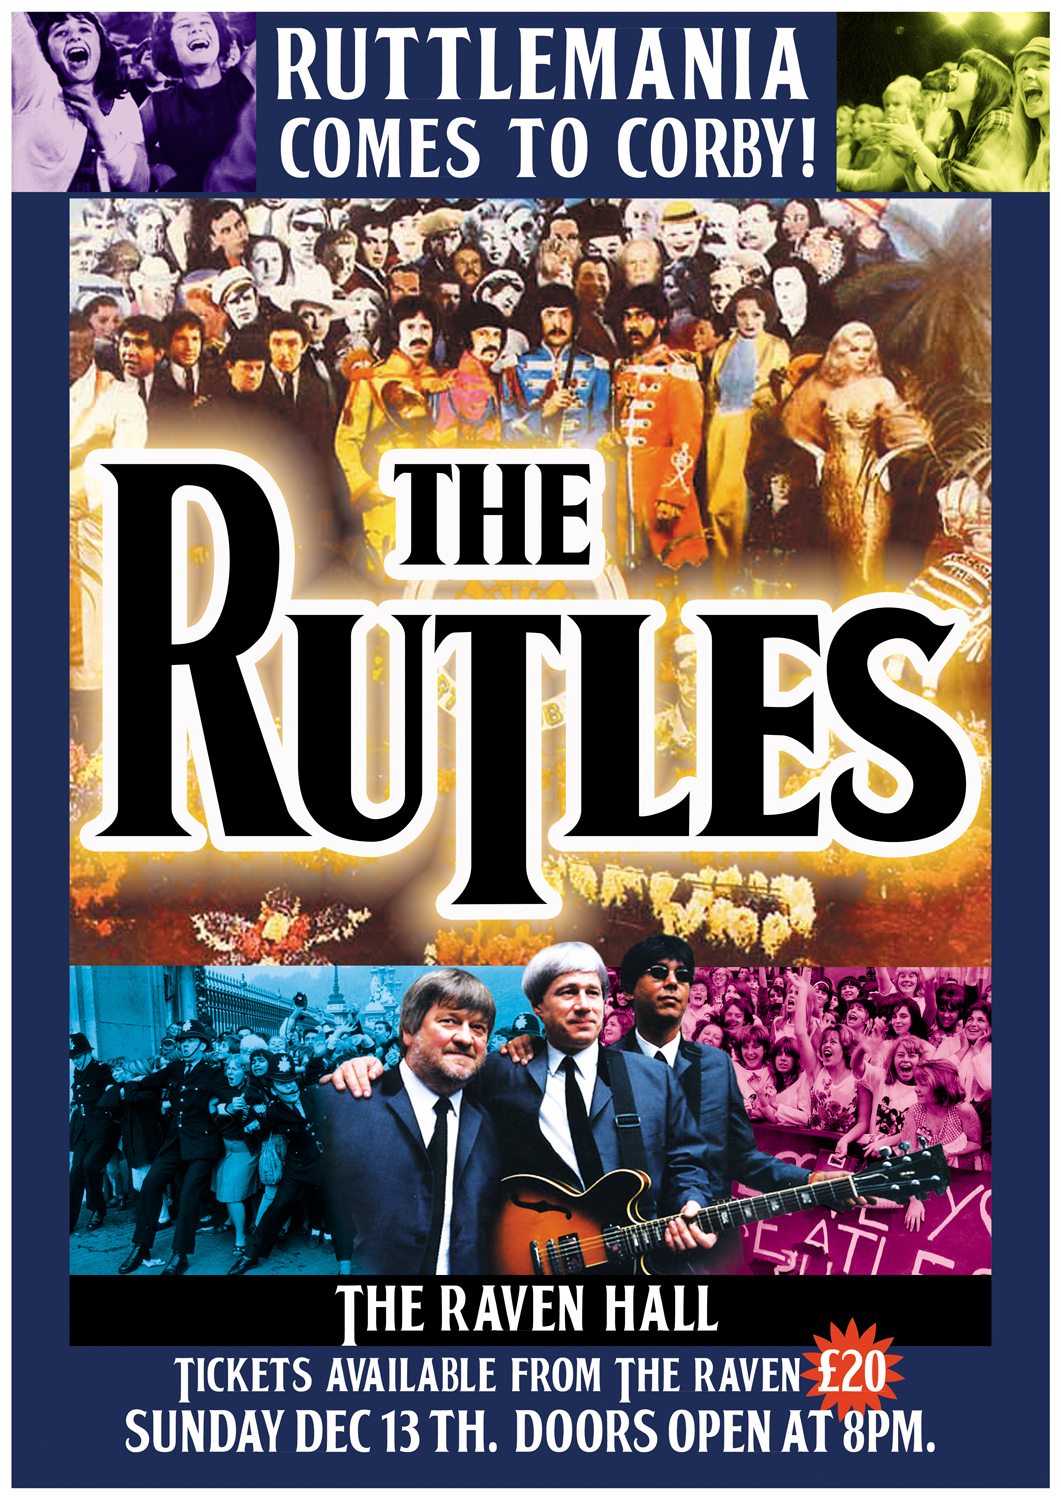 THE RUTLES